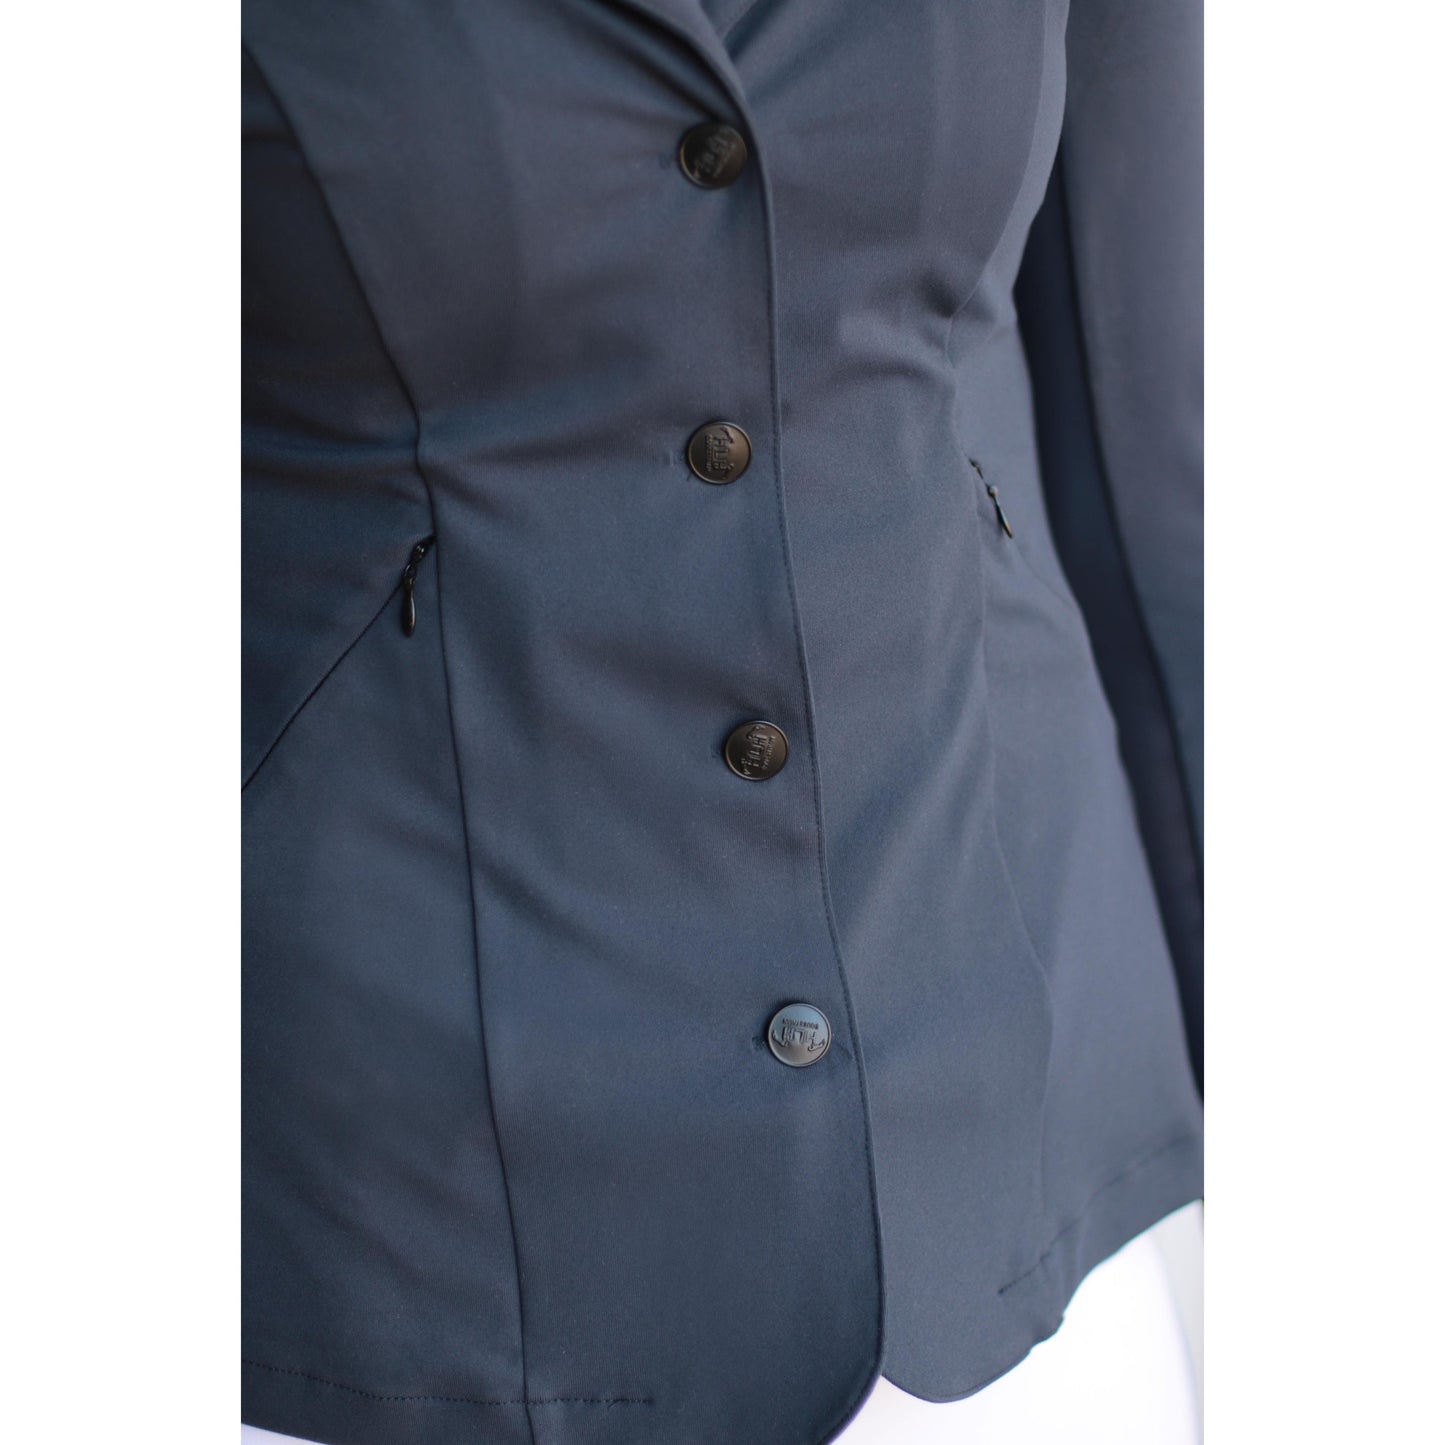 HLH Equestrian Apparel Second Skin Show Jacket-Southern Sport Horses-The Equestrian